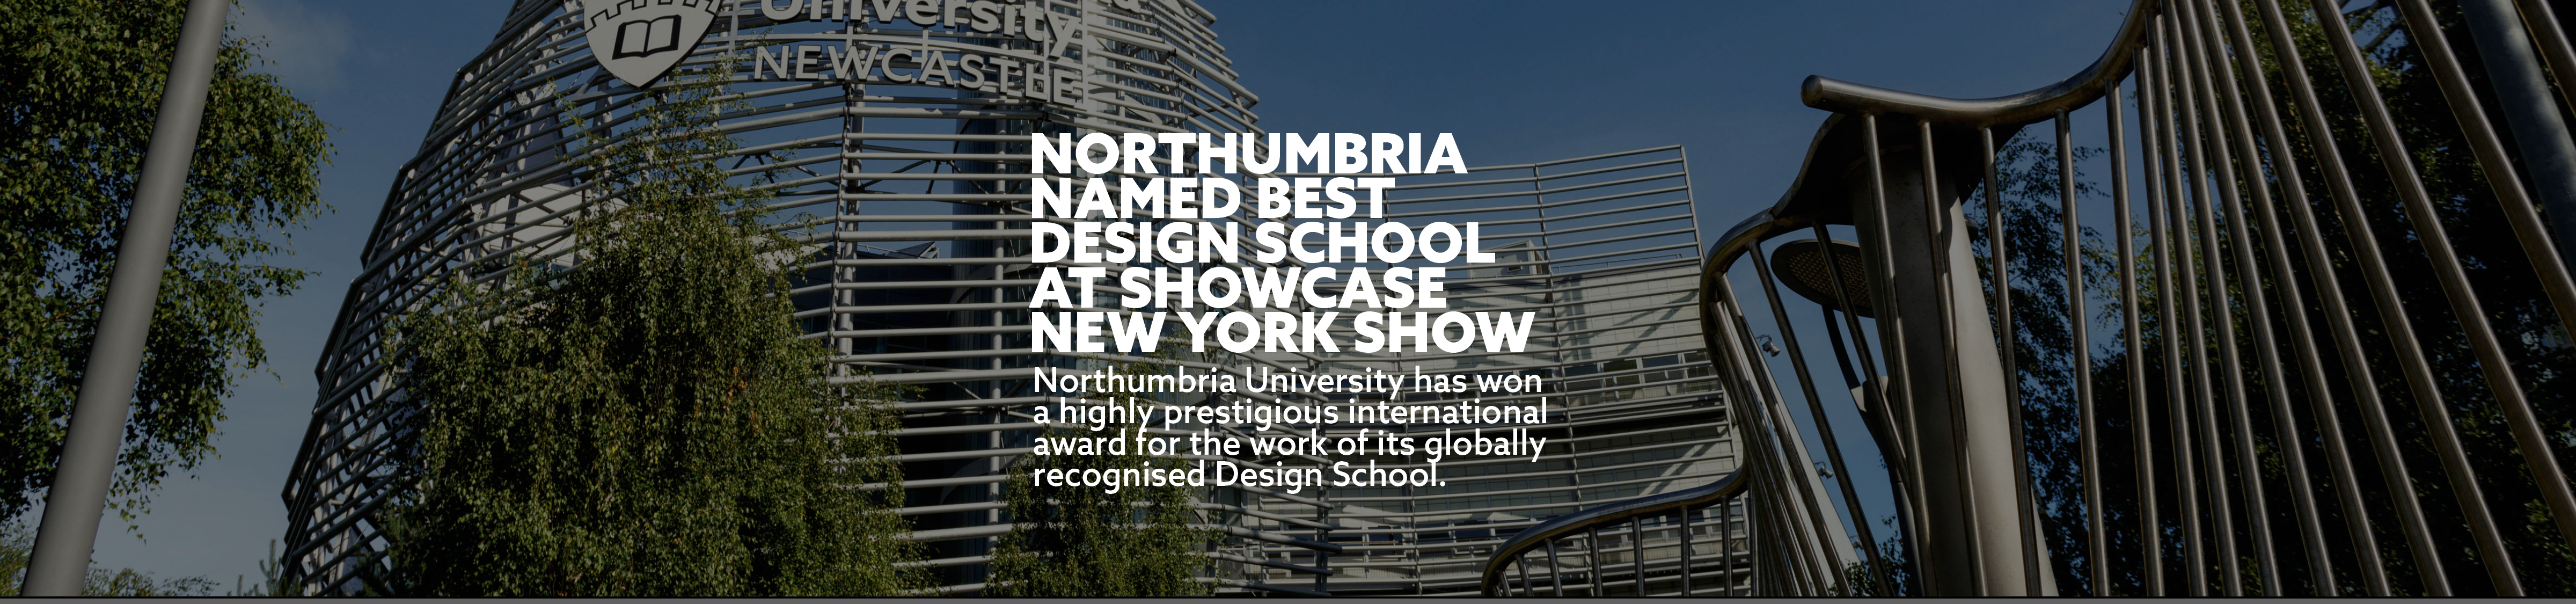 Northumbria named best design school at showcase new york show